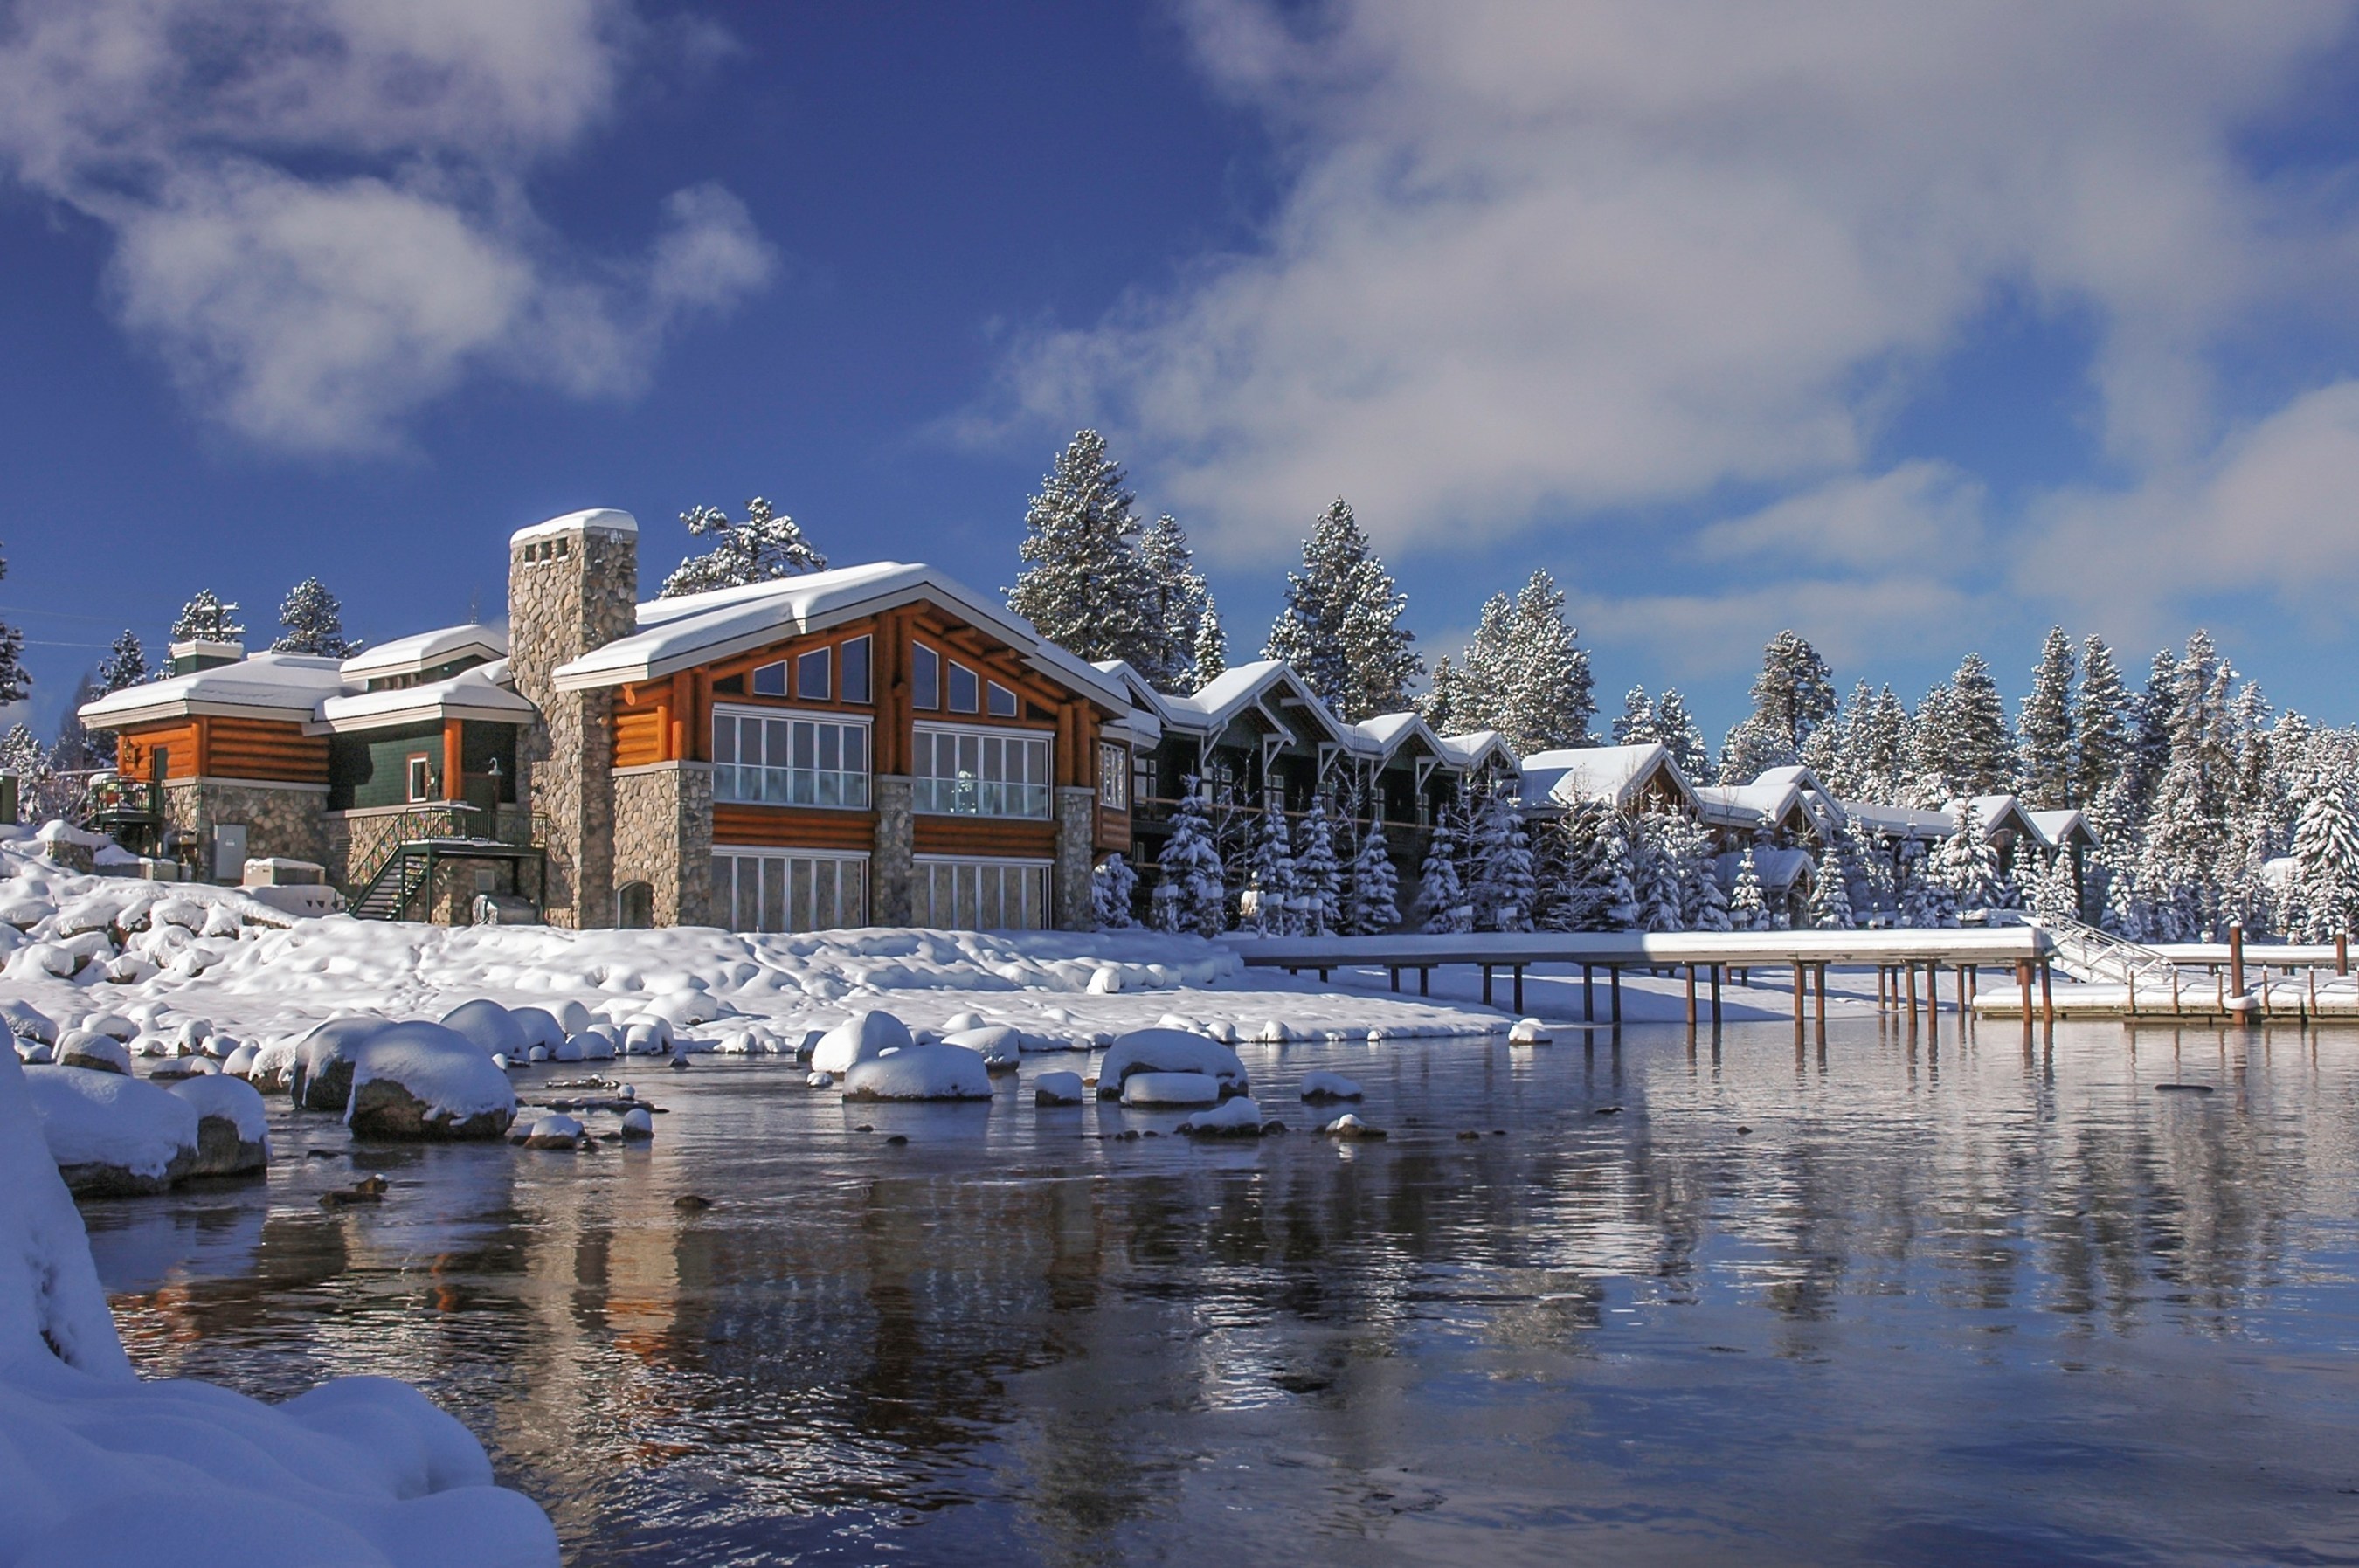 Shore Lodge in McCall, Idaho won Best Resort in Idaho at the 4th Annual Northwest Meetings   Events Best Of Awards held in Seattle, Washington.